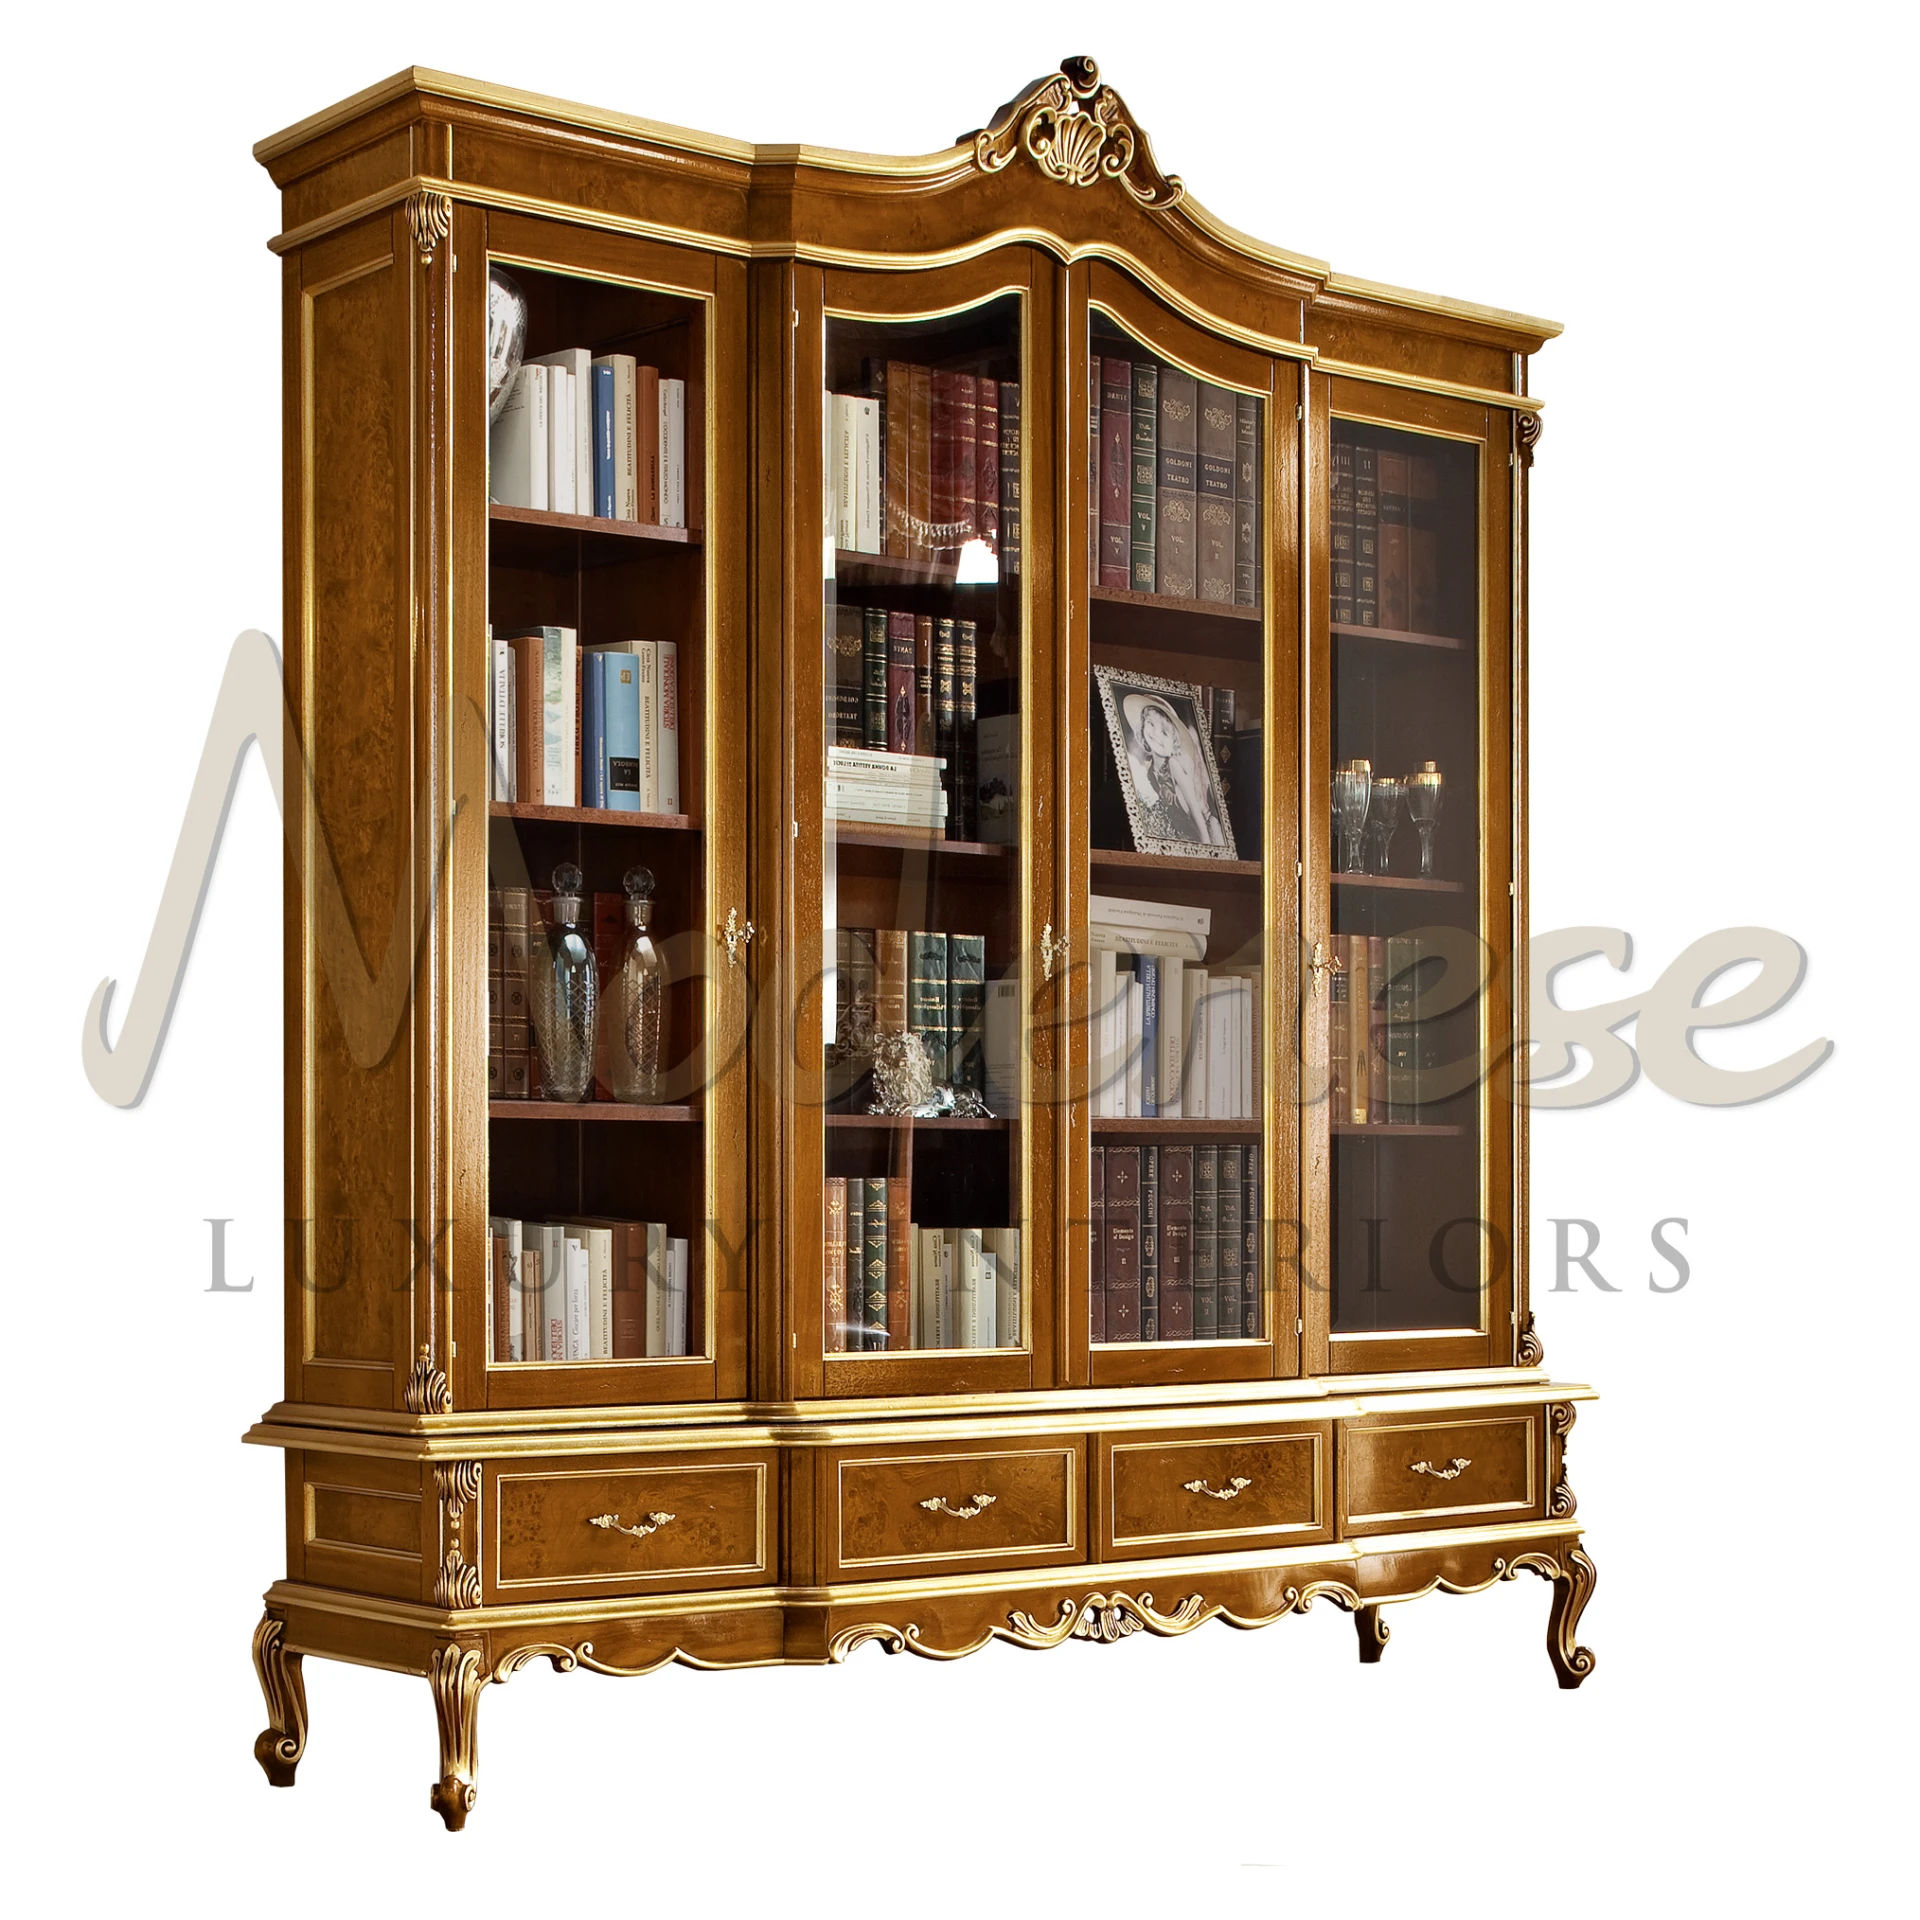 Product View with Clear Background - Wooden Classical bookcase - Modenese Luxury Furniture